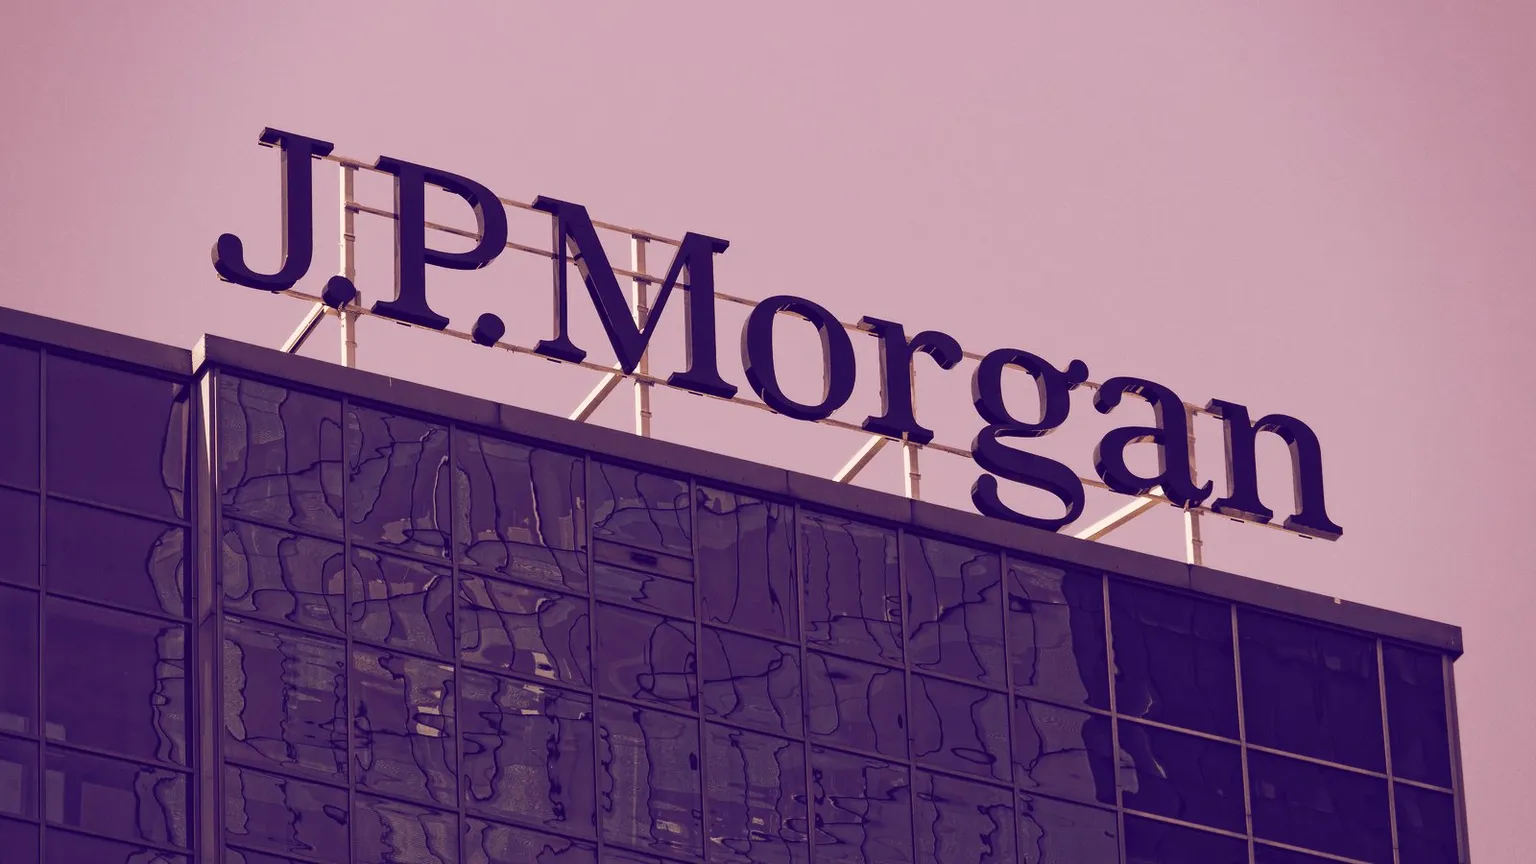 The subsidiary of JP Morgan has returned money to investors after it overcharged them for buying crypto. Image: Shutterstock